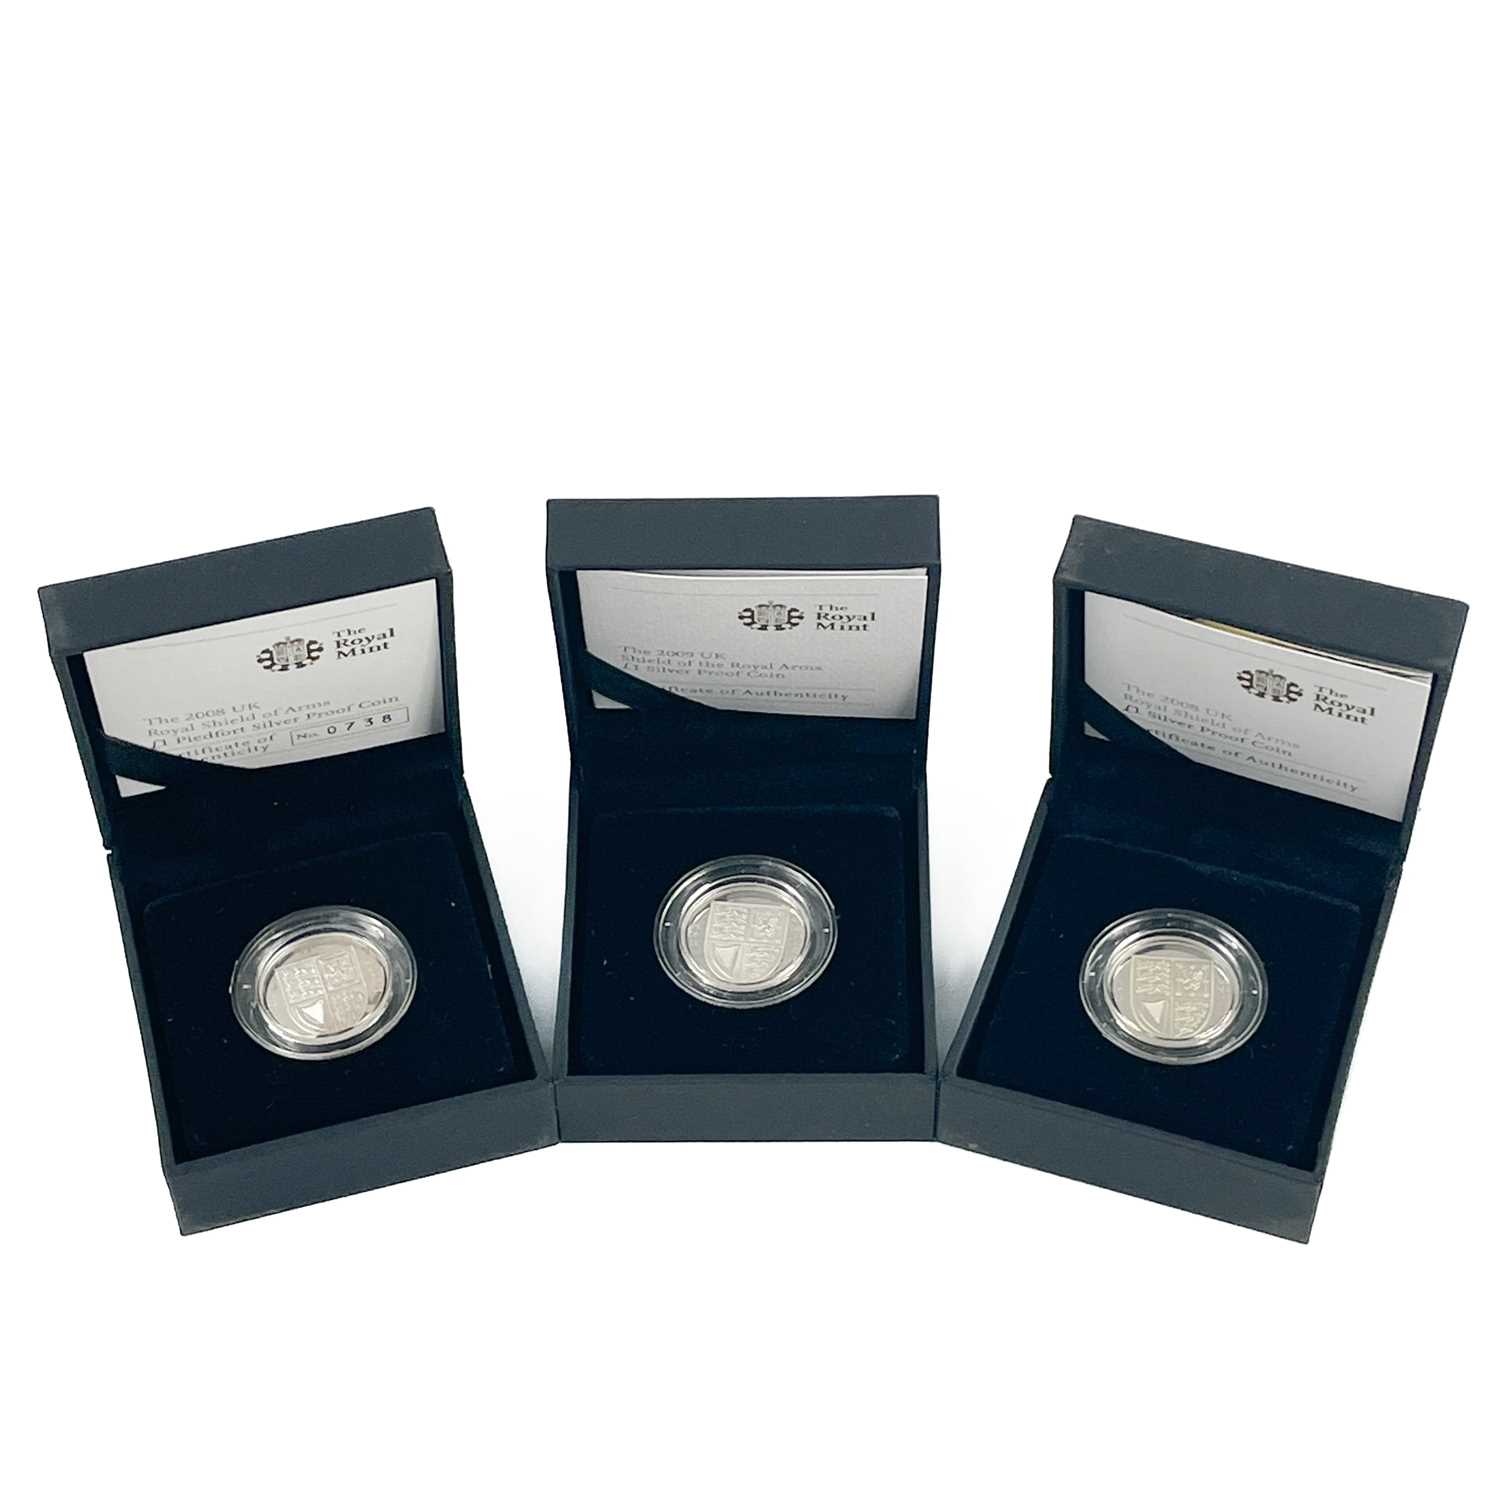 UK Silver Proof £1 Coins 2006 to 2009 (8 coins) in Royal Mint Coin Cases. - Image 3 of 8